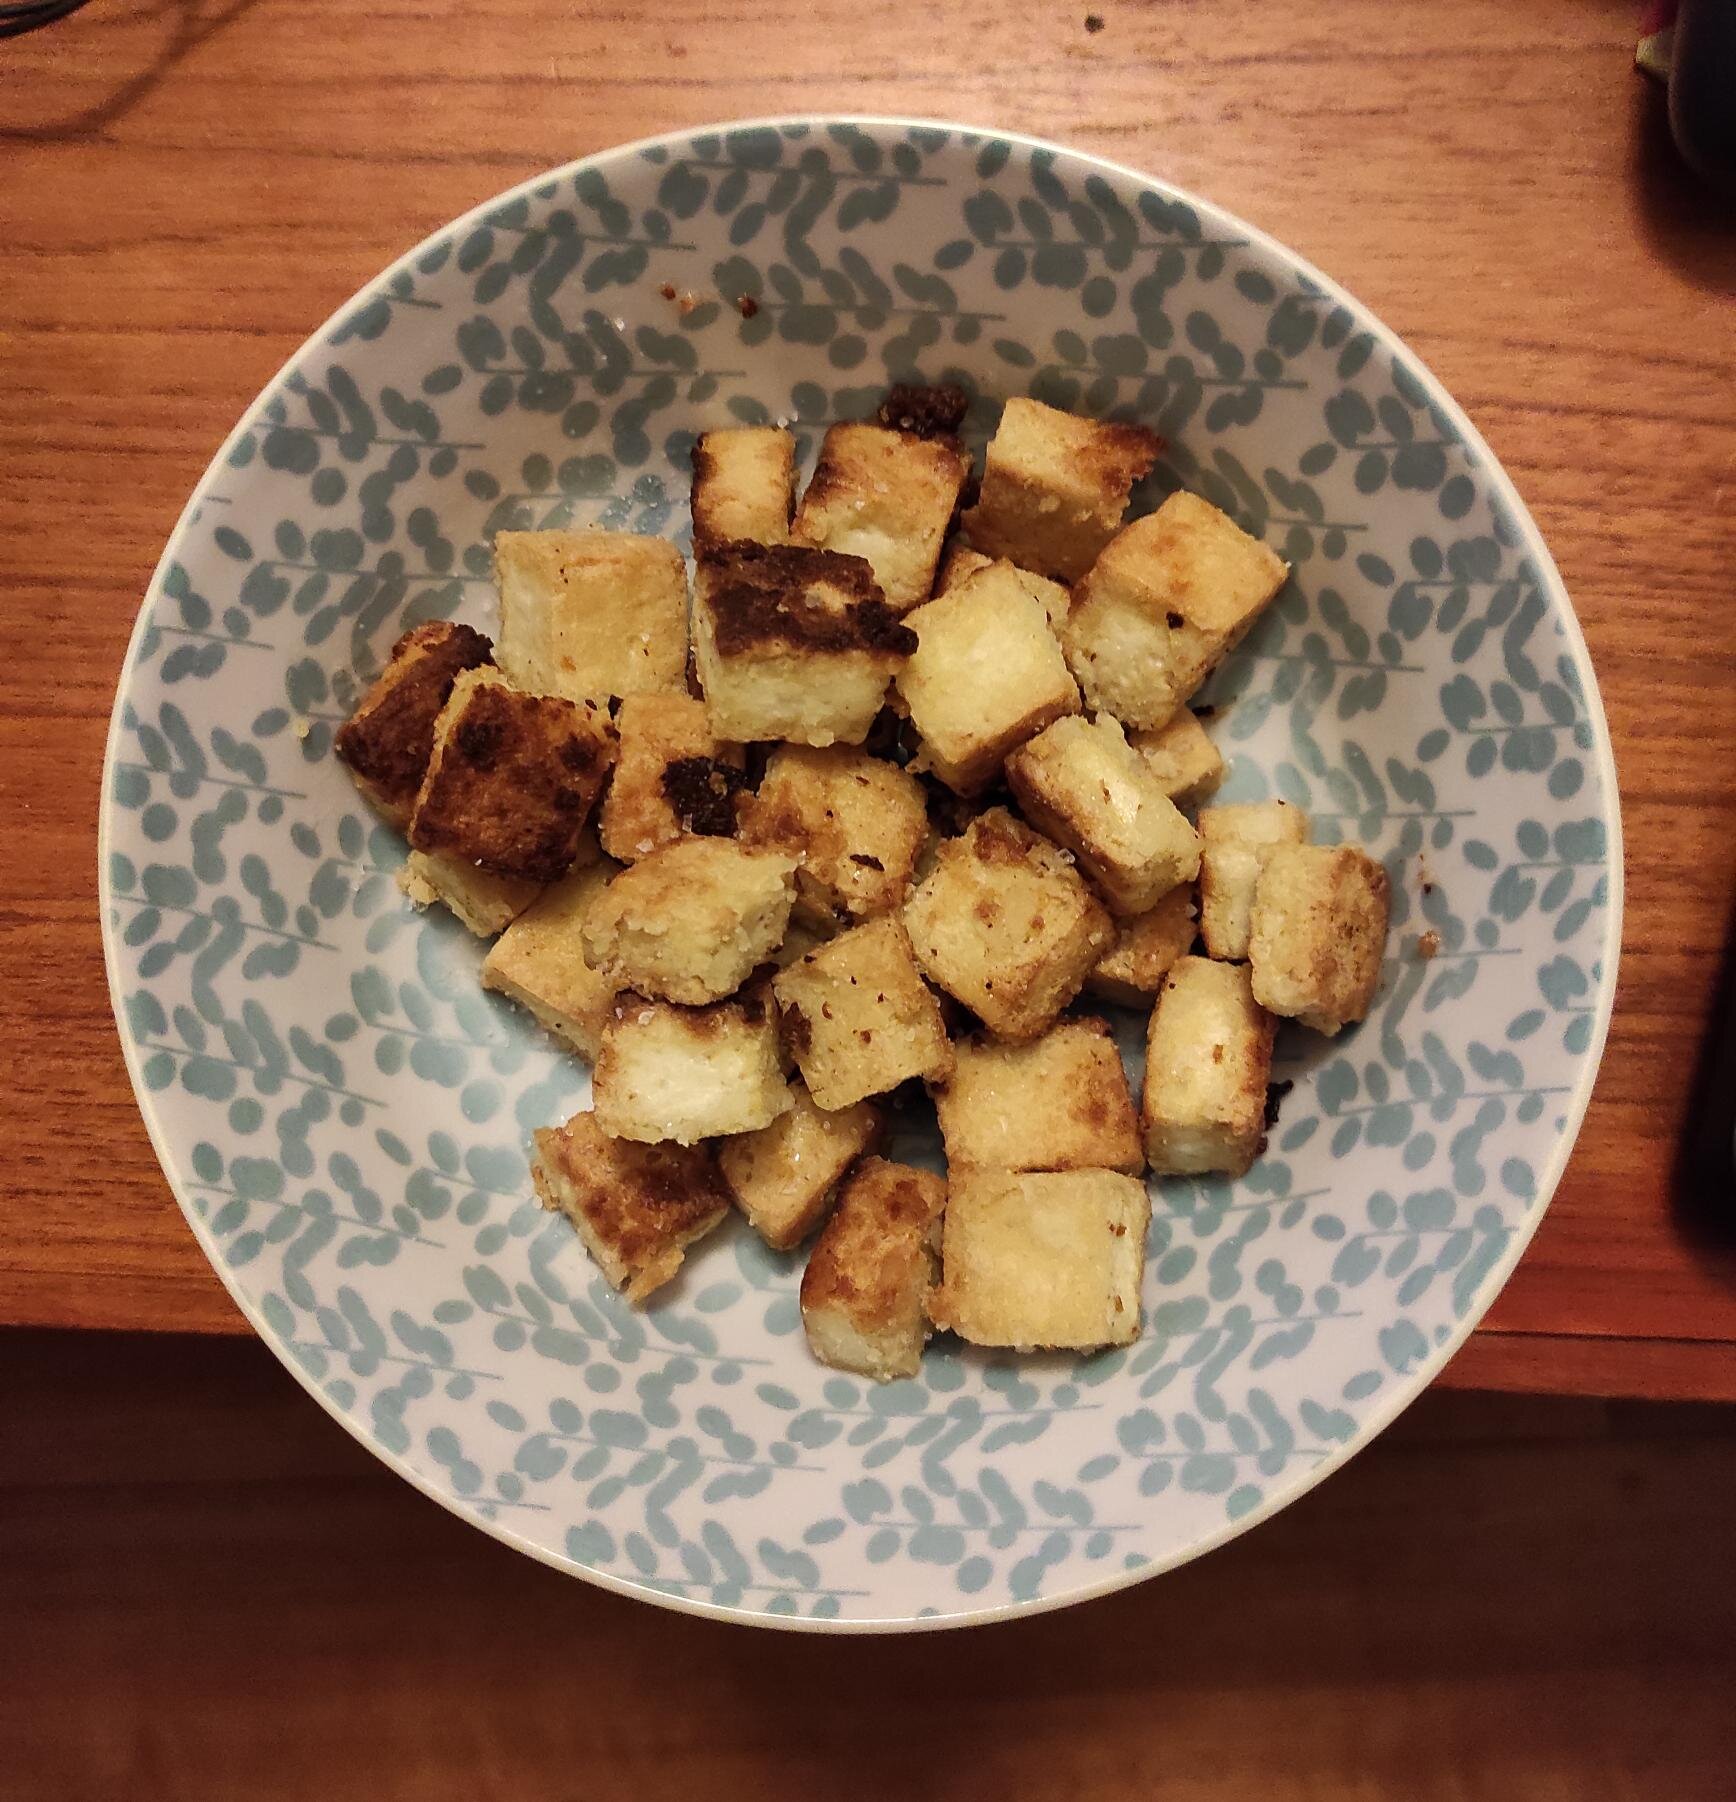 Alex saved up his tofu for one of his final meals!